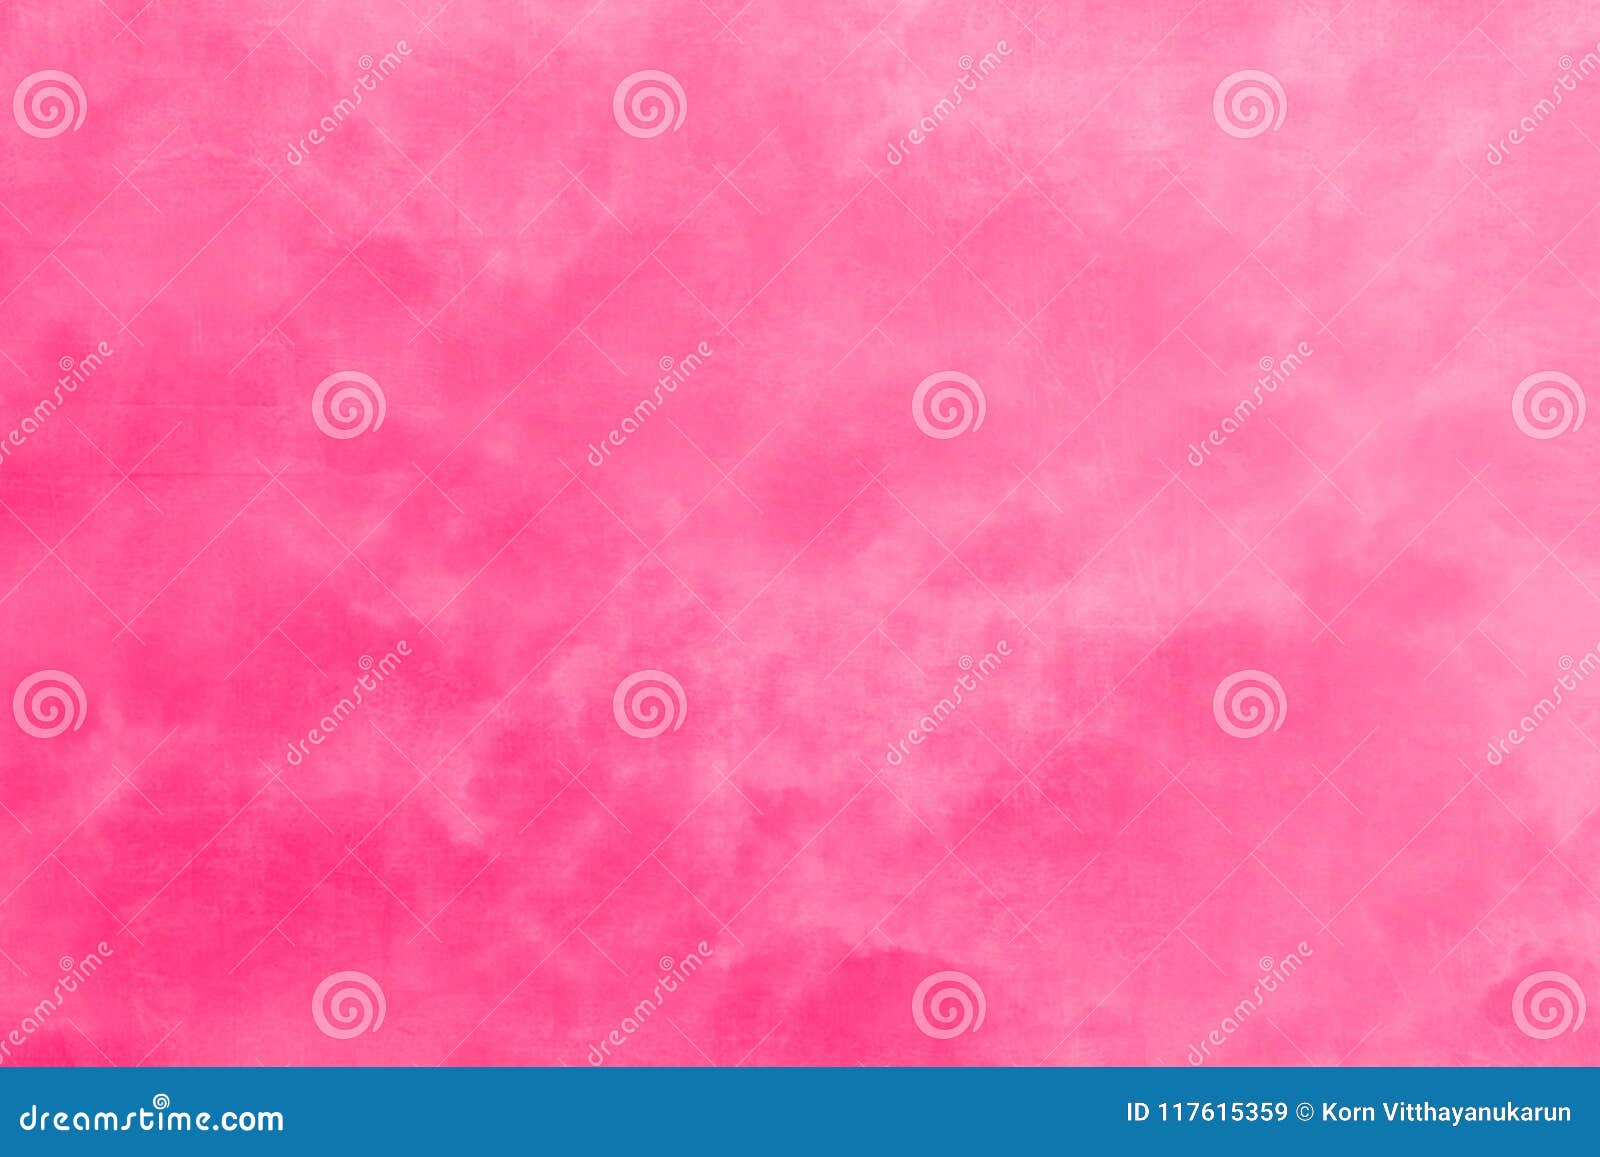 Pink Water Color Paint Wall Background Stock Image - Image of ...